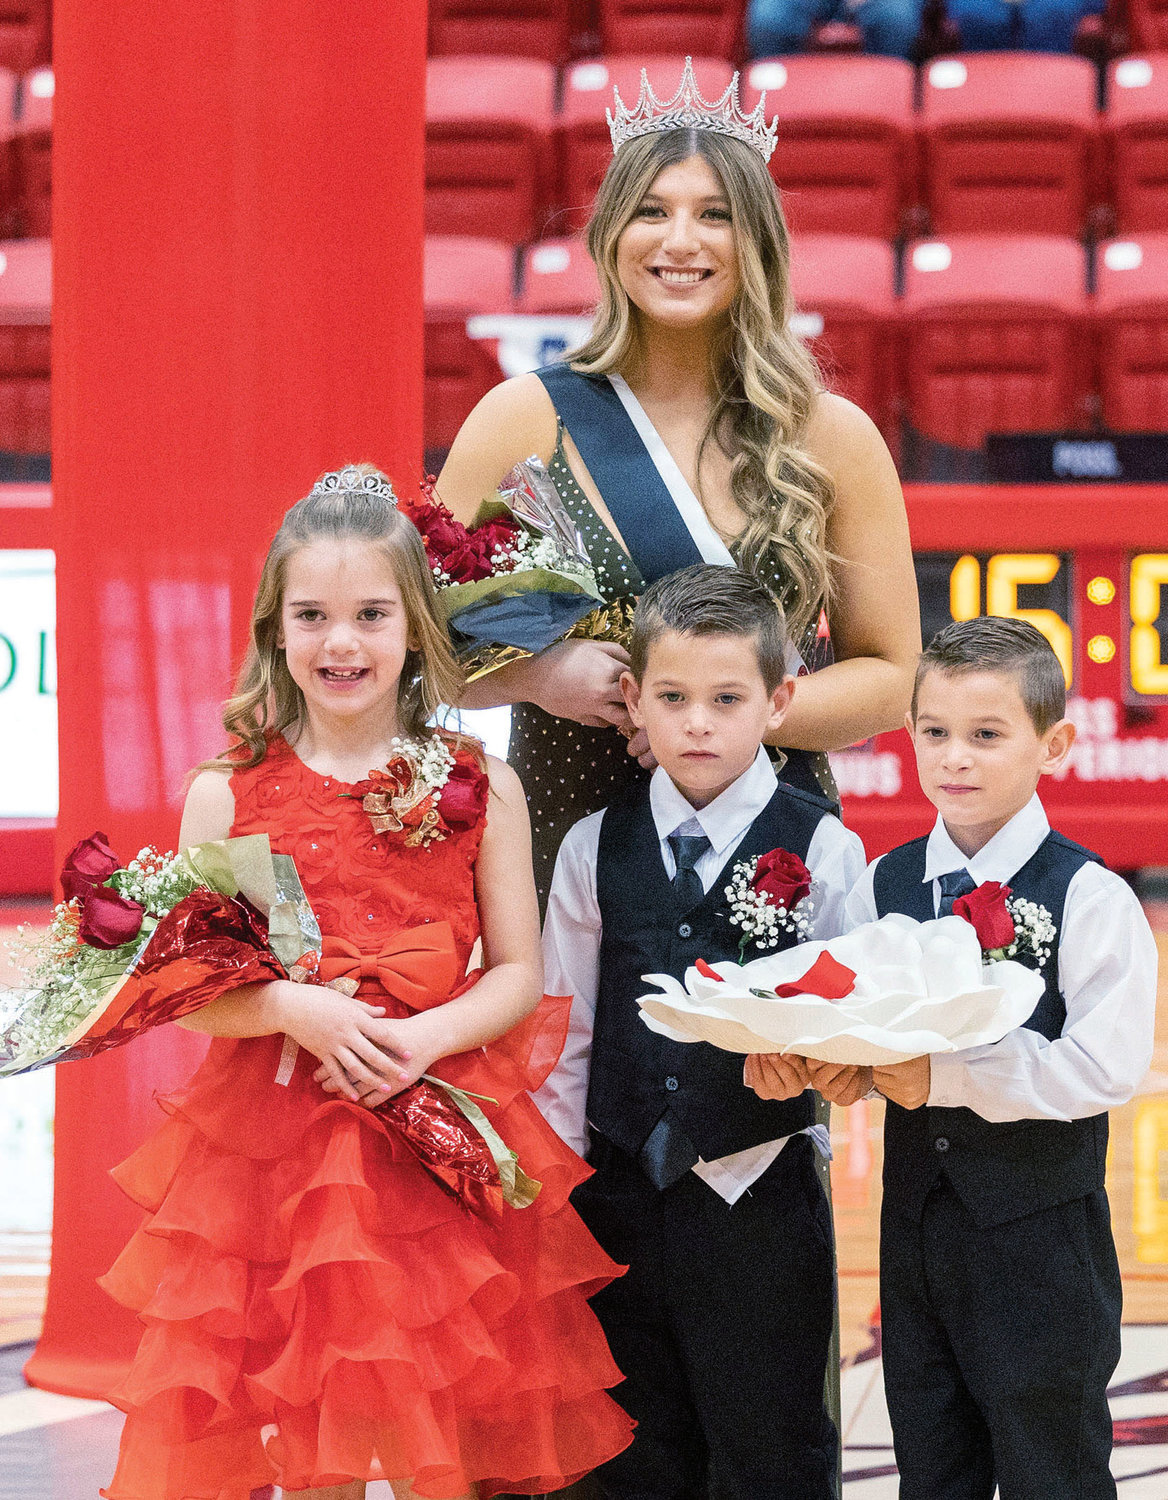 Washington senior Kyndall Wells was crowned queen Friday night during coronation at the Warrior Event Center. Krozlie Simon was the flower girl and Jett and Curry Tims were the crown bearers.